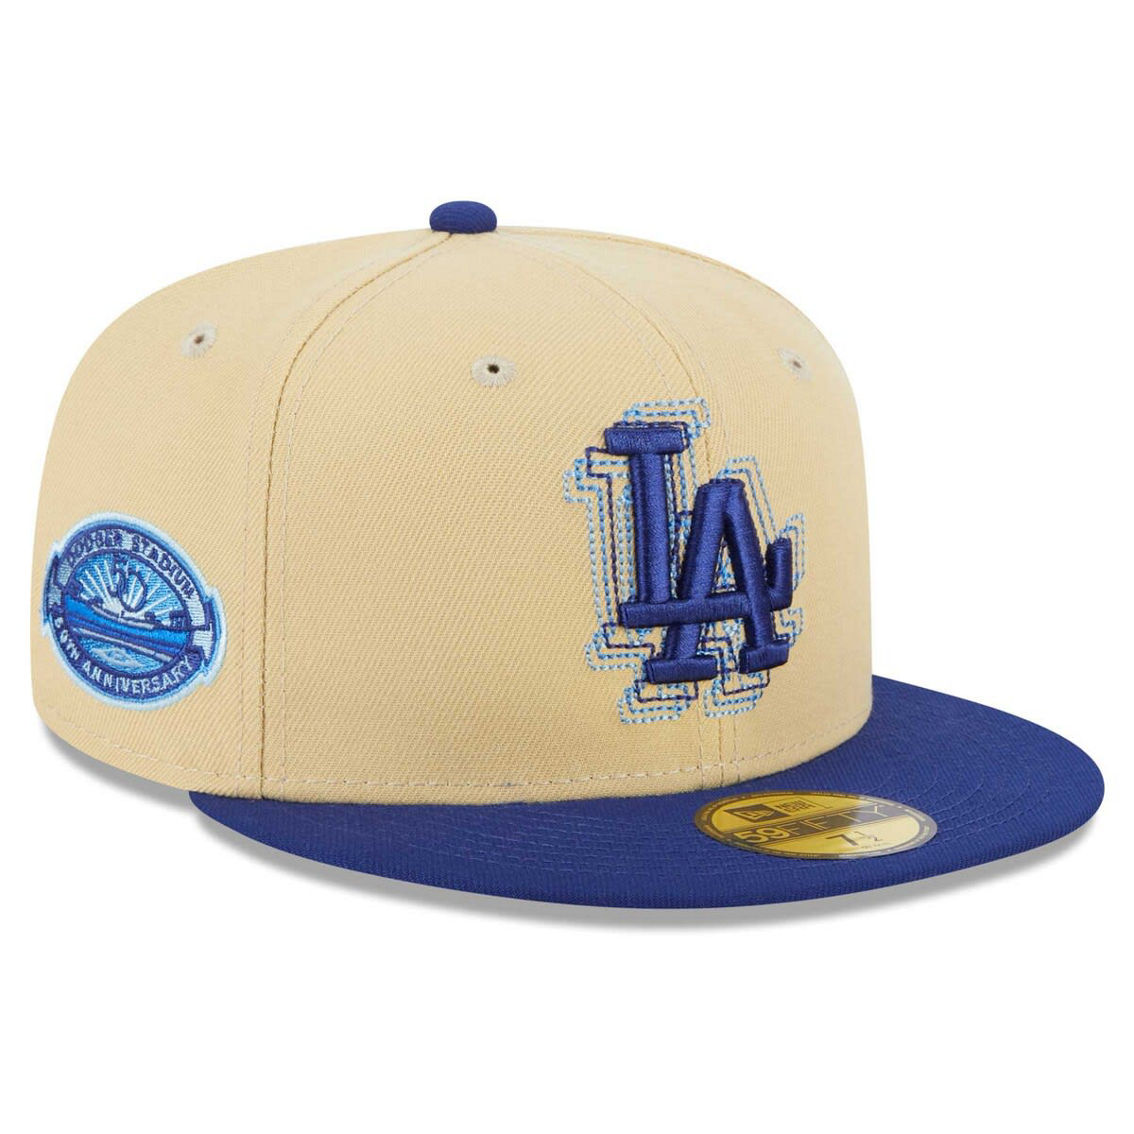 New Era Men's Cream/Royal Los Angeles Dodgers Illusion 59FIFTY Fitted Hat - Image 2 of 4